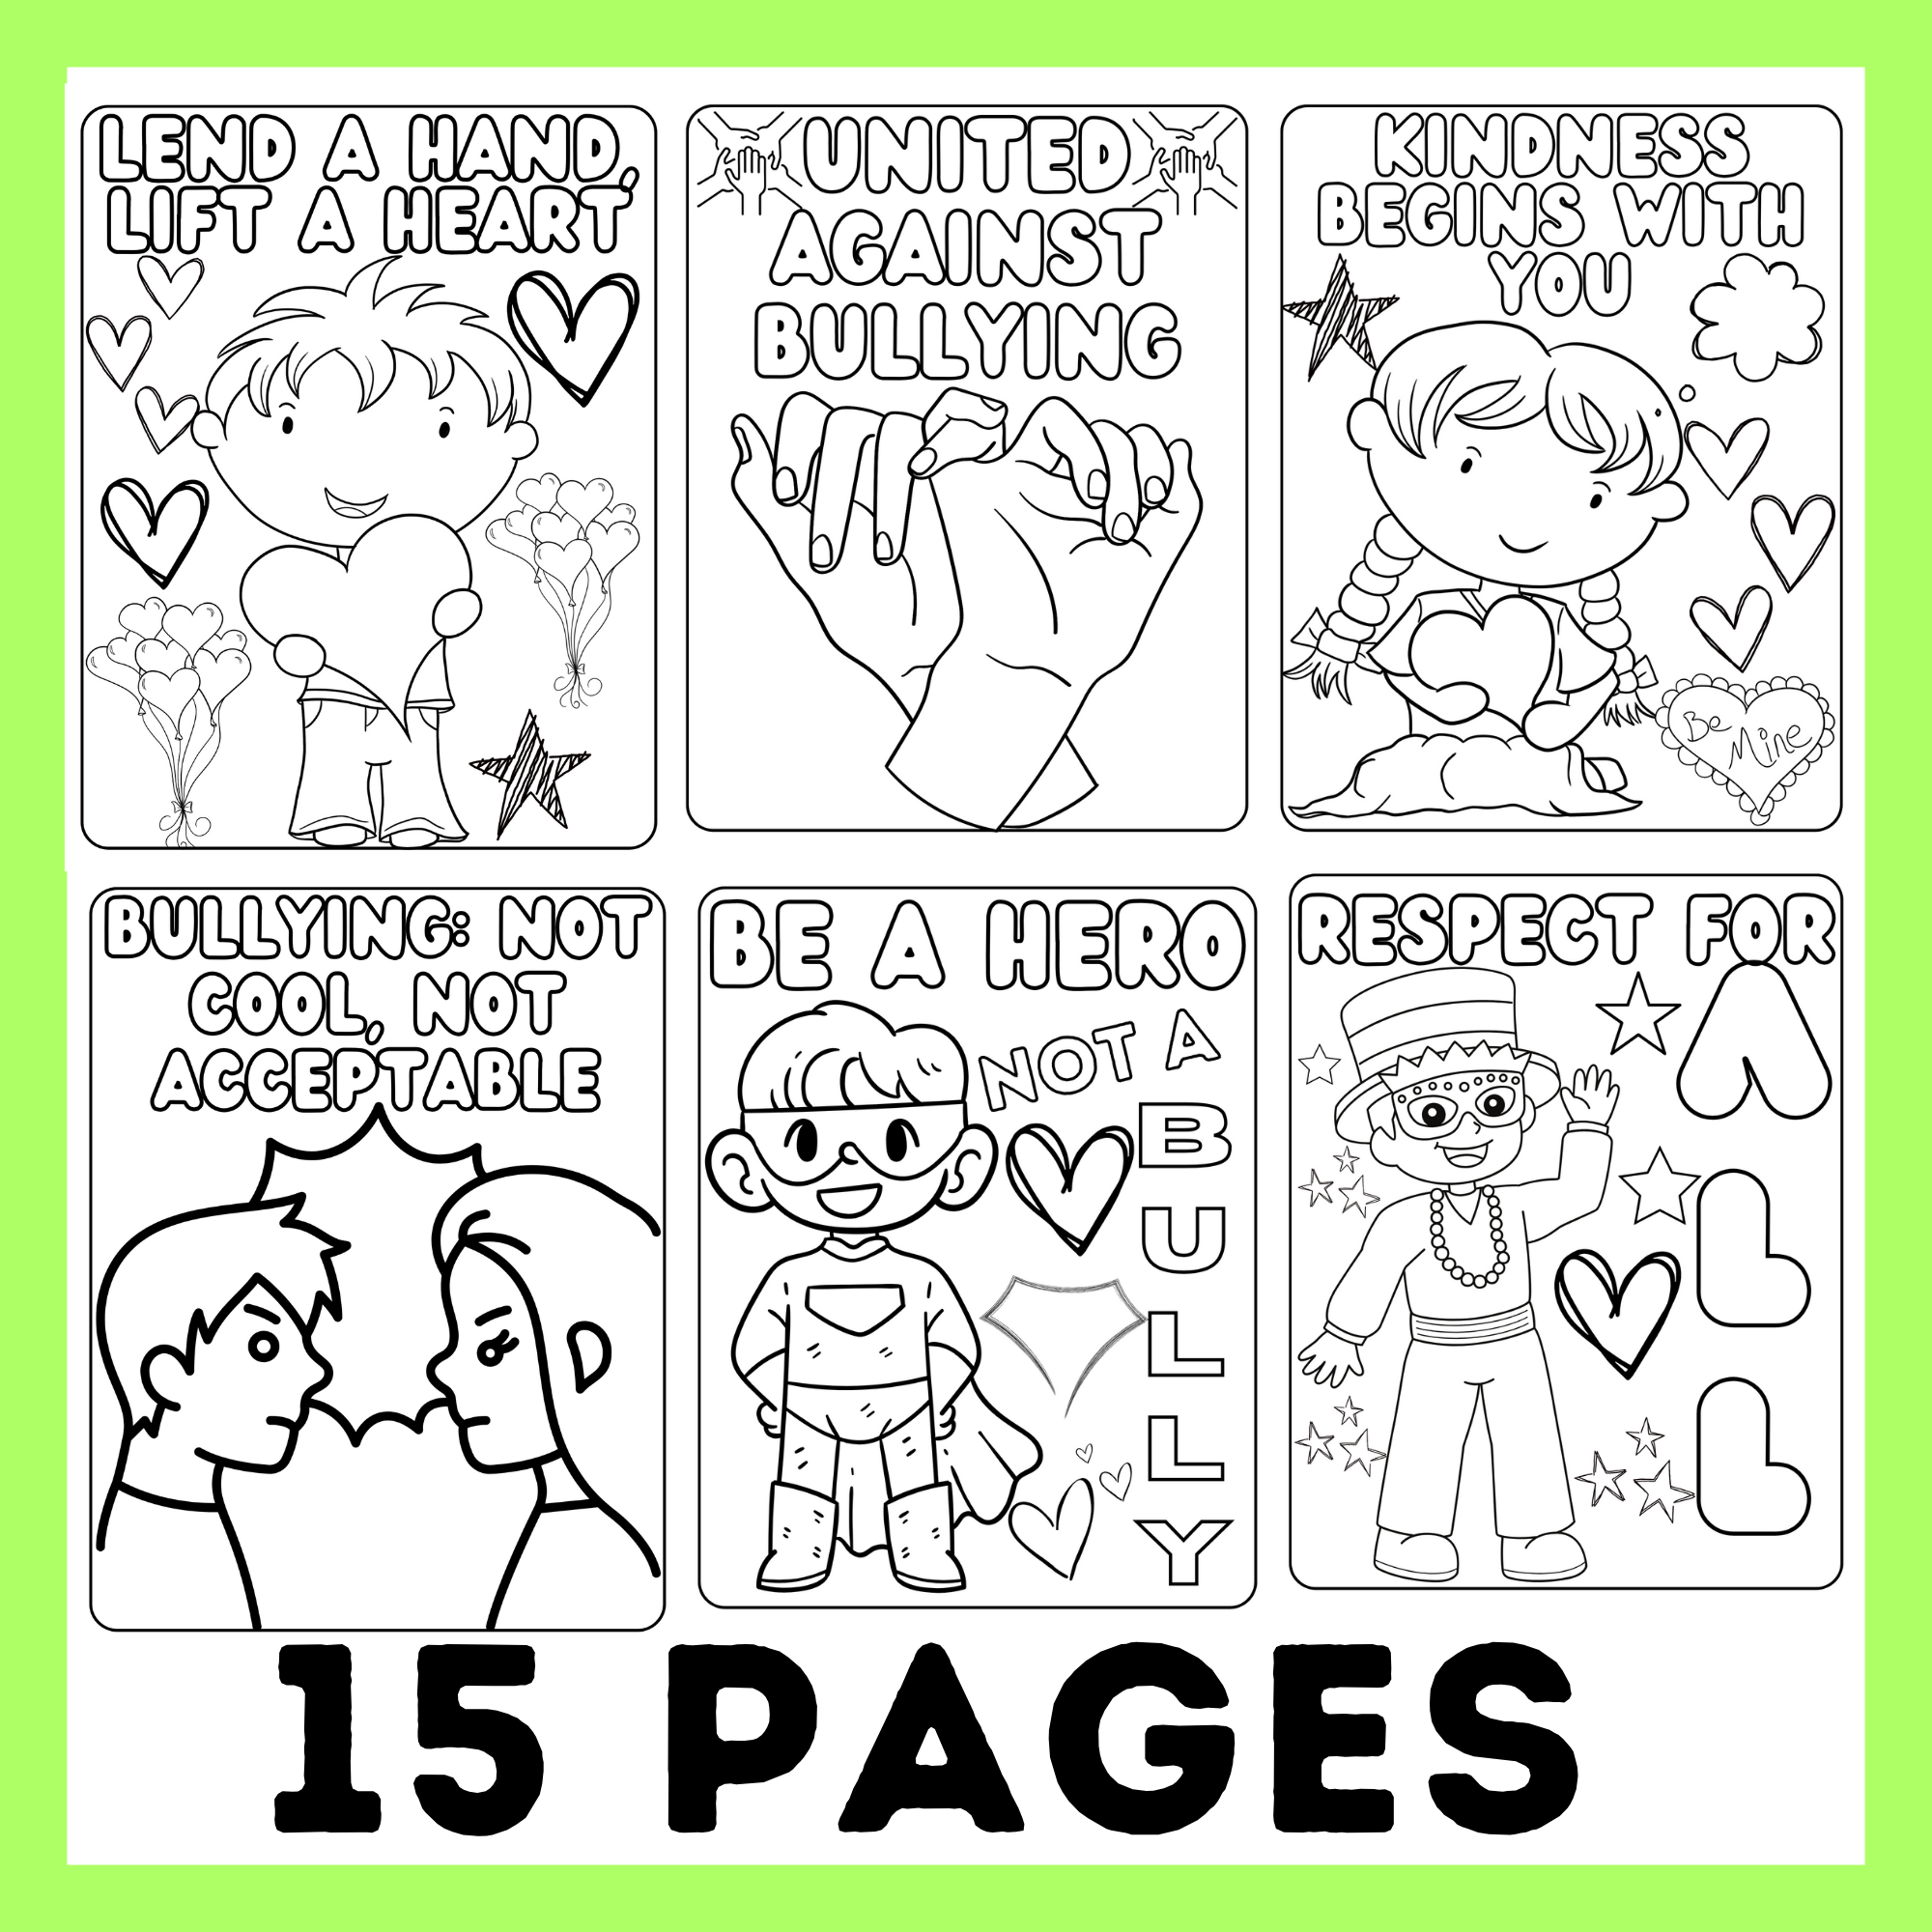 Bully prevention month coloring pages anti